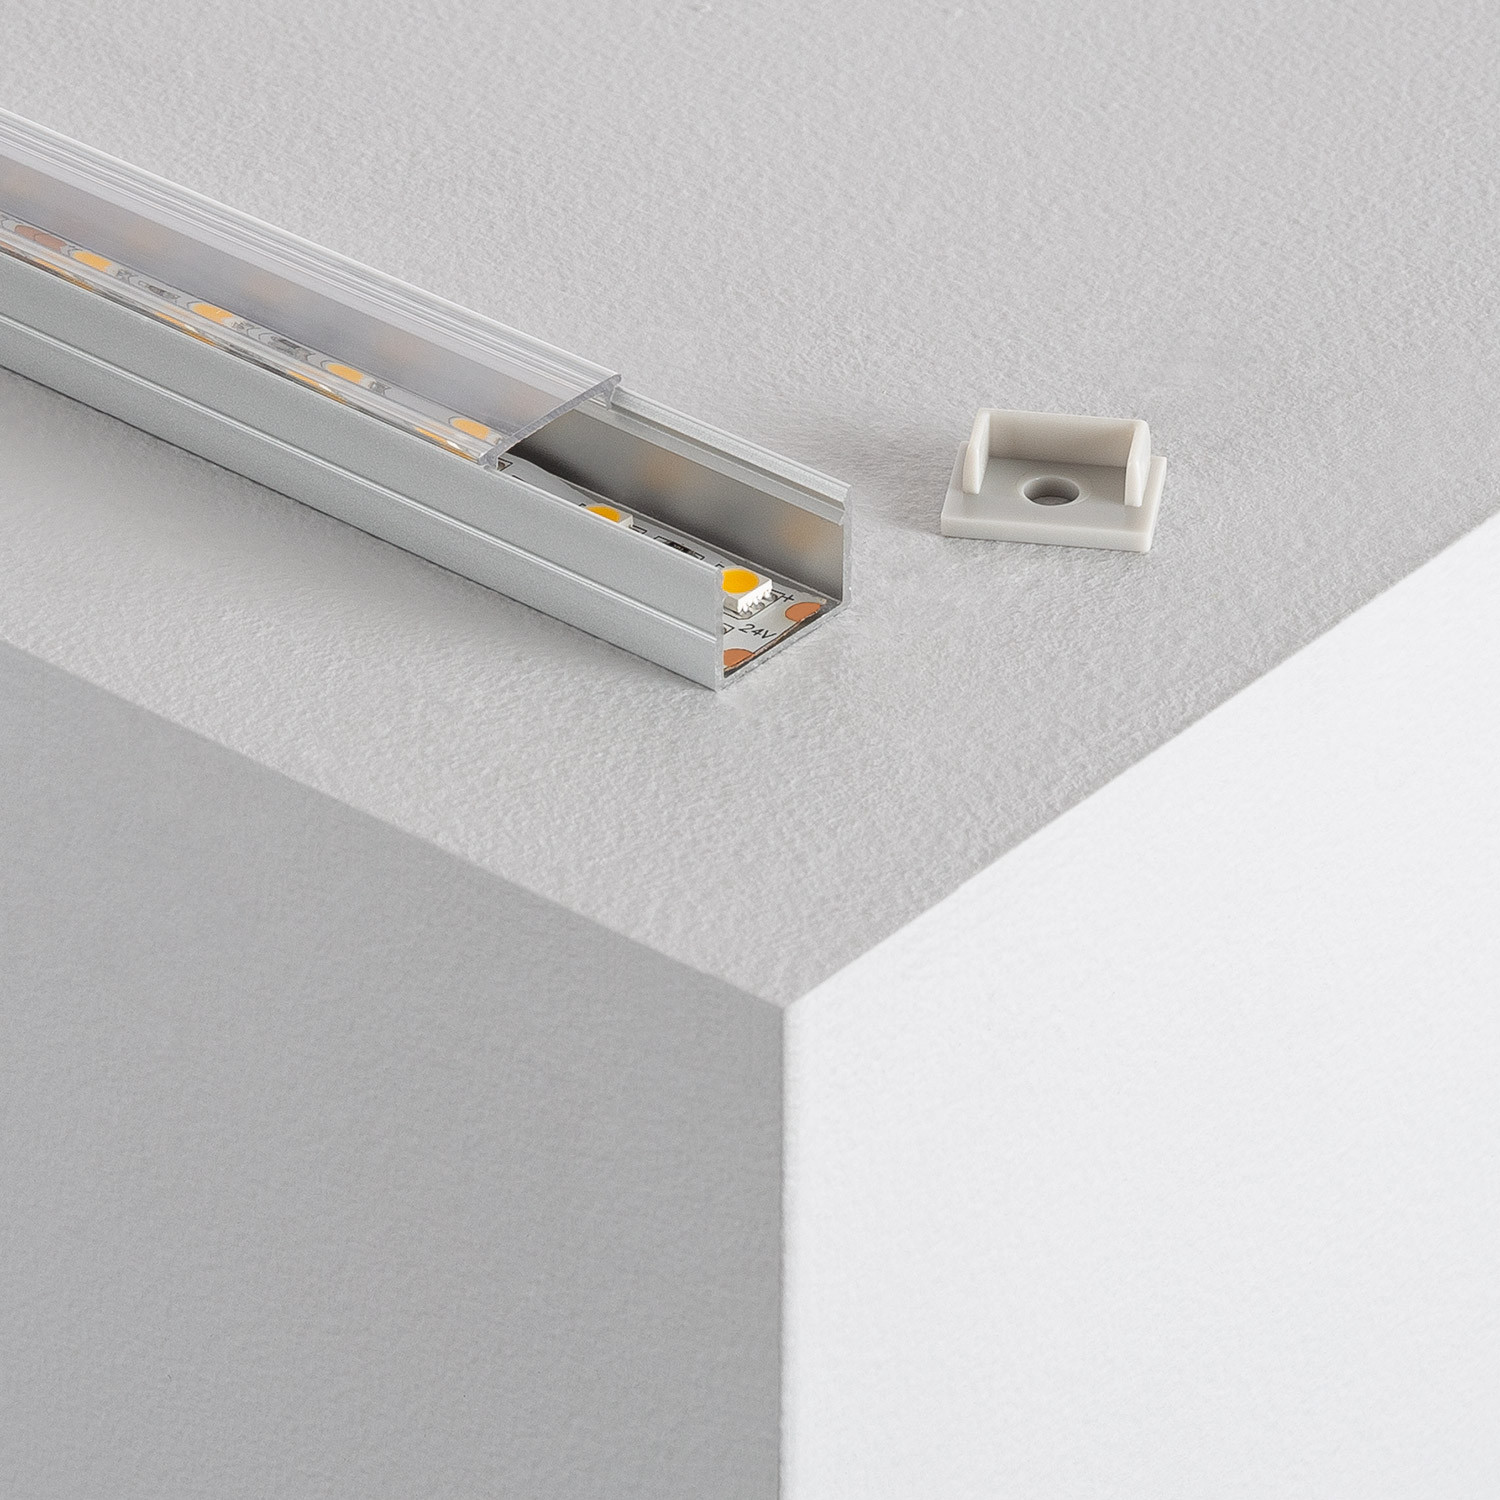 Aluminium Profile with Continuous Cover for LED Strips to 16mm - Ledkia